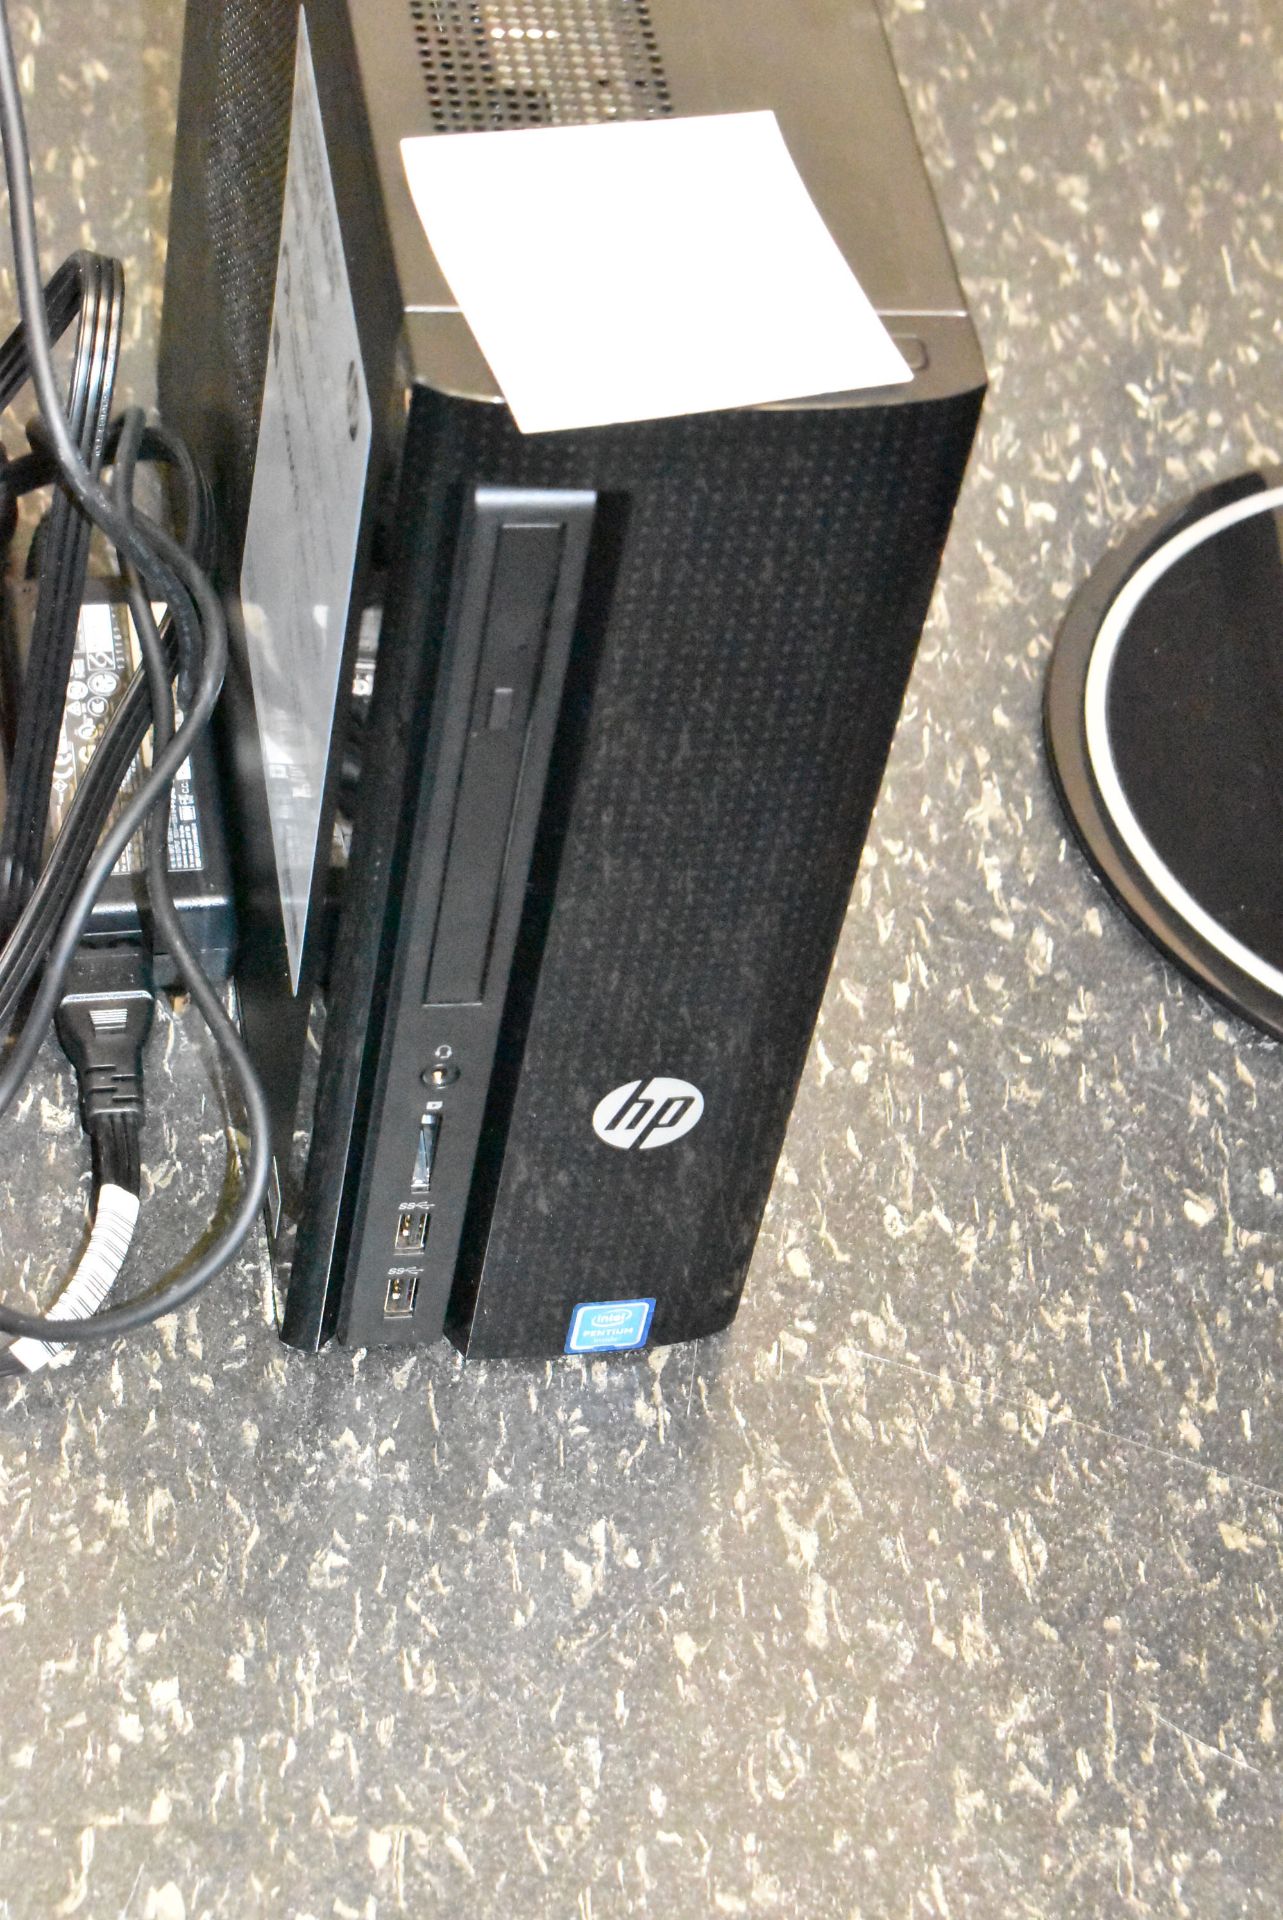 LOT/ HP DESKTOP COMPUTER WITH VIEWSONIC MONITOR - Image 2 of 2